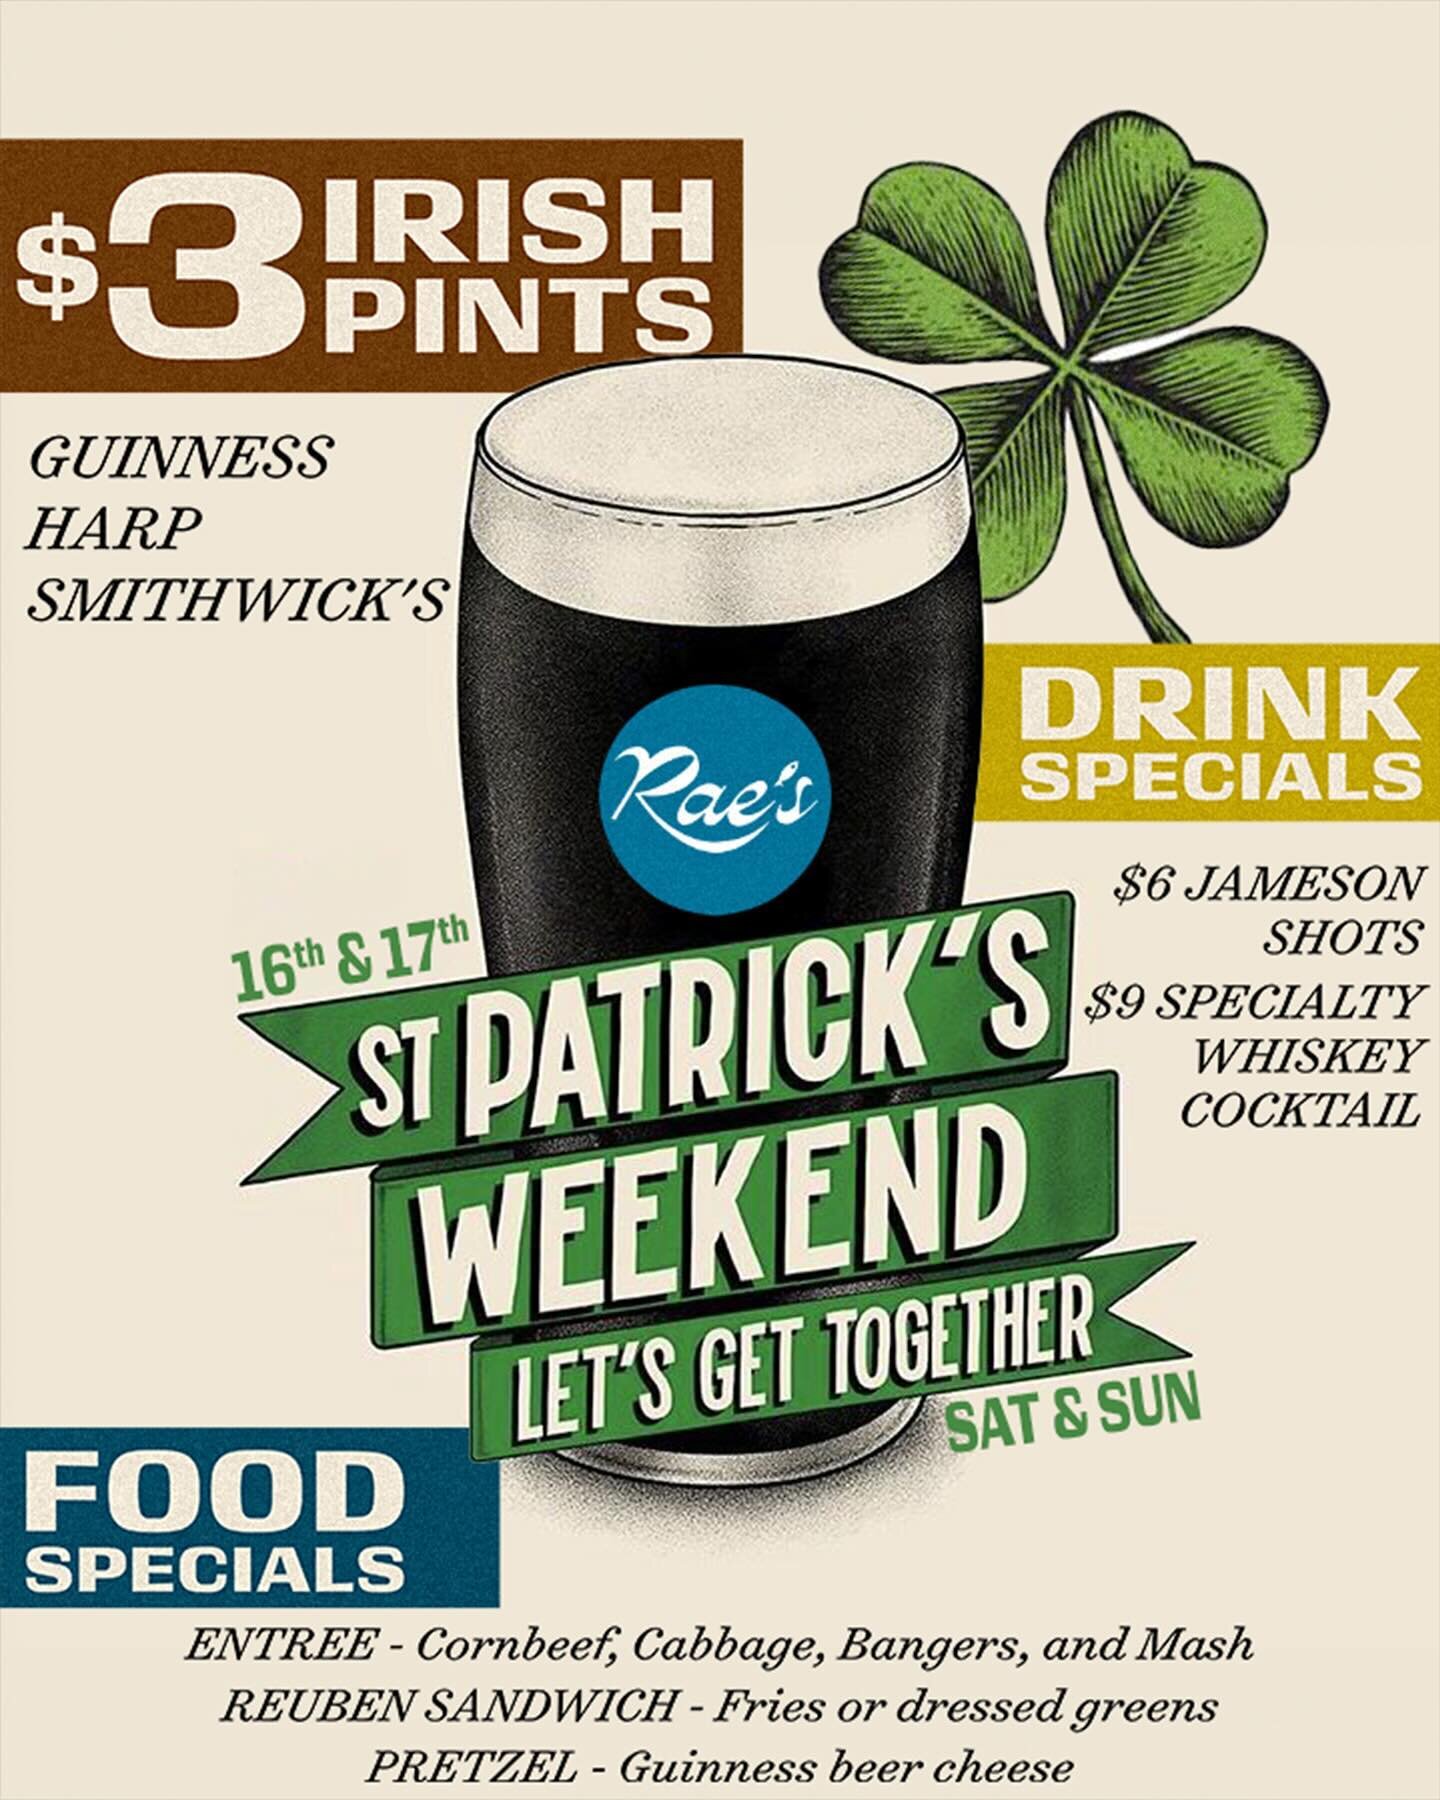 Kegs are flowing this weekend at Rae&rsquo;s! We have our favorite Irish brews on tap for ONLY $3 A PINT (and yes this does include Guinness! 🍀)

Our Chefs have perfected their favorite recipes just for the occassion, including a Reuben with house-m